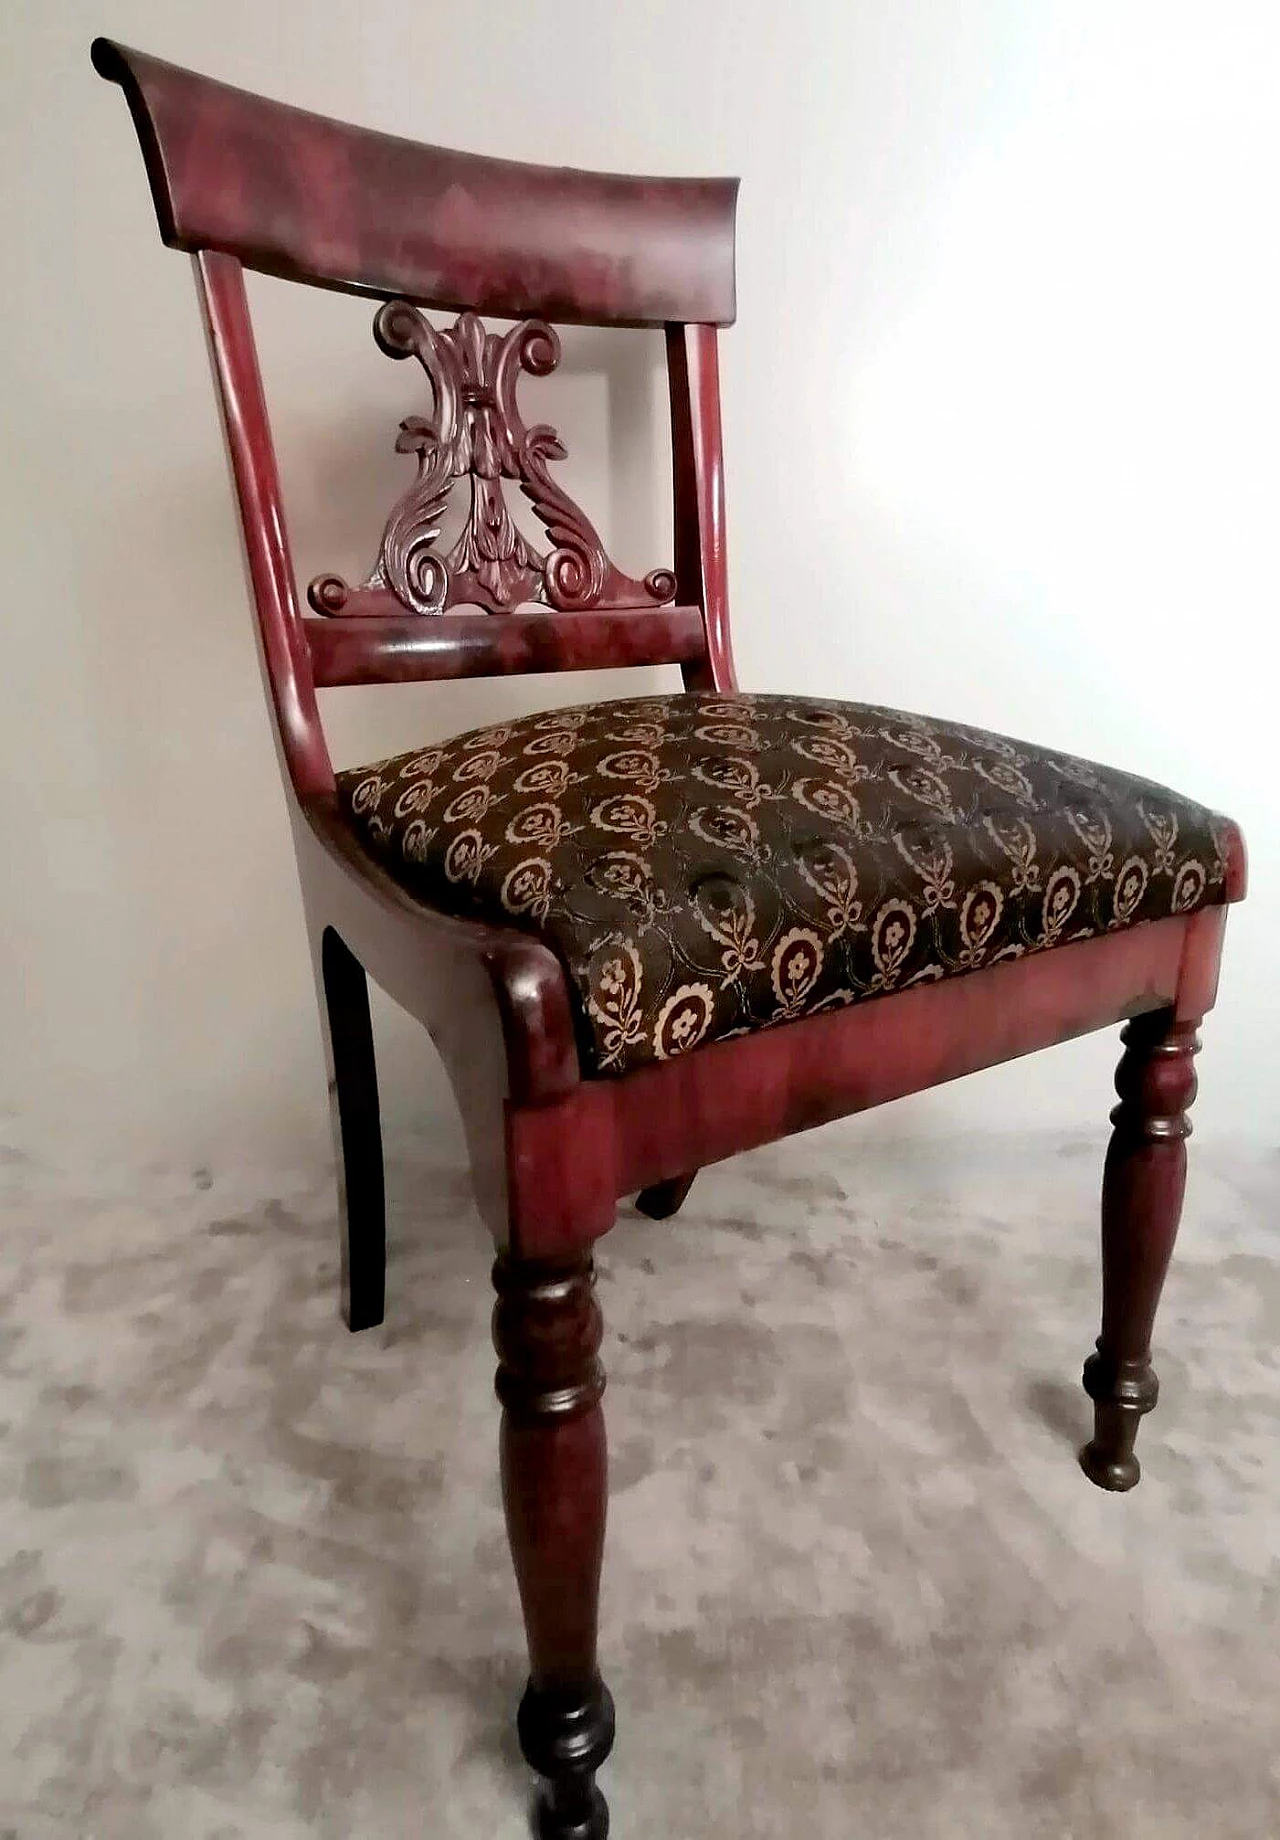 Biedermeier style chair in wood and fabric, 19th century 1466141